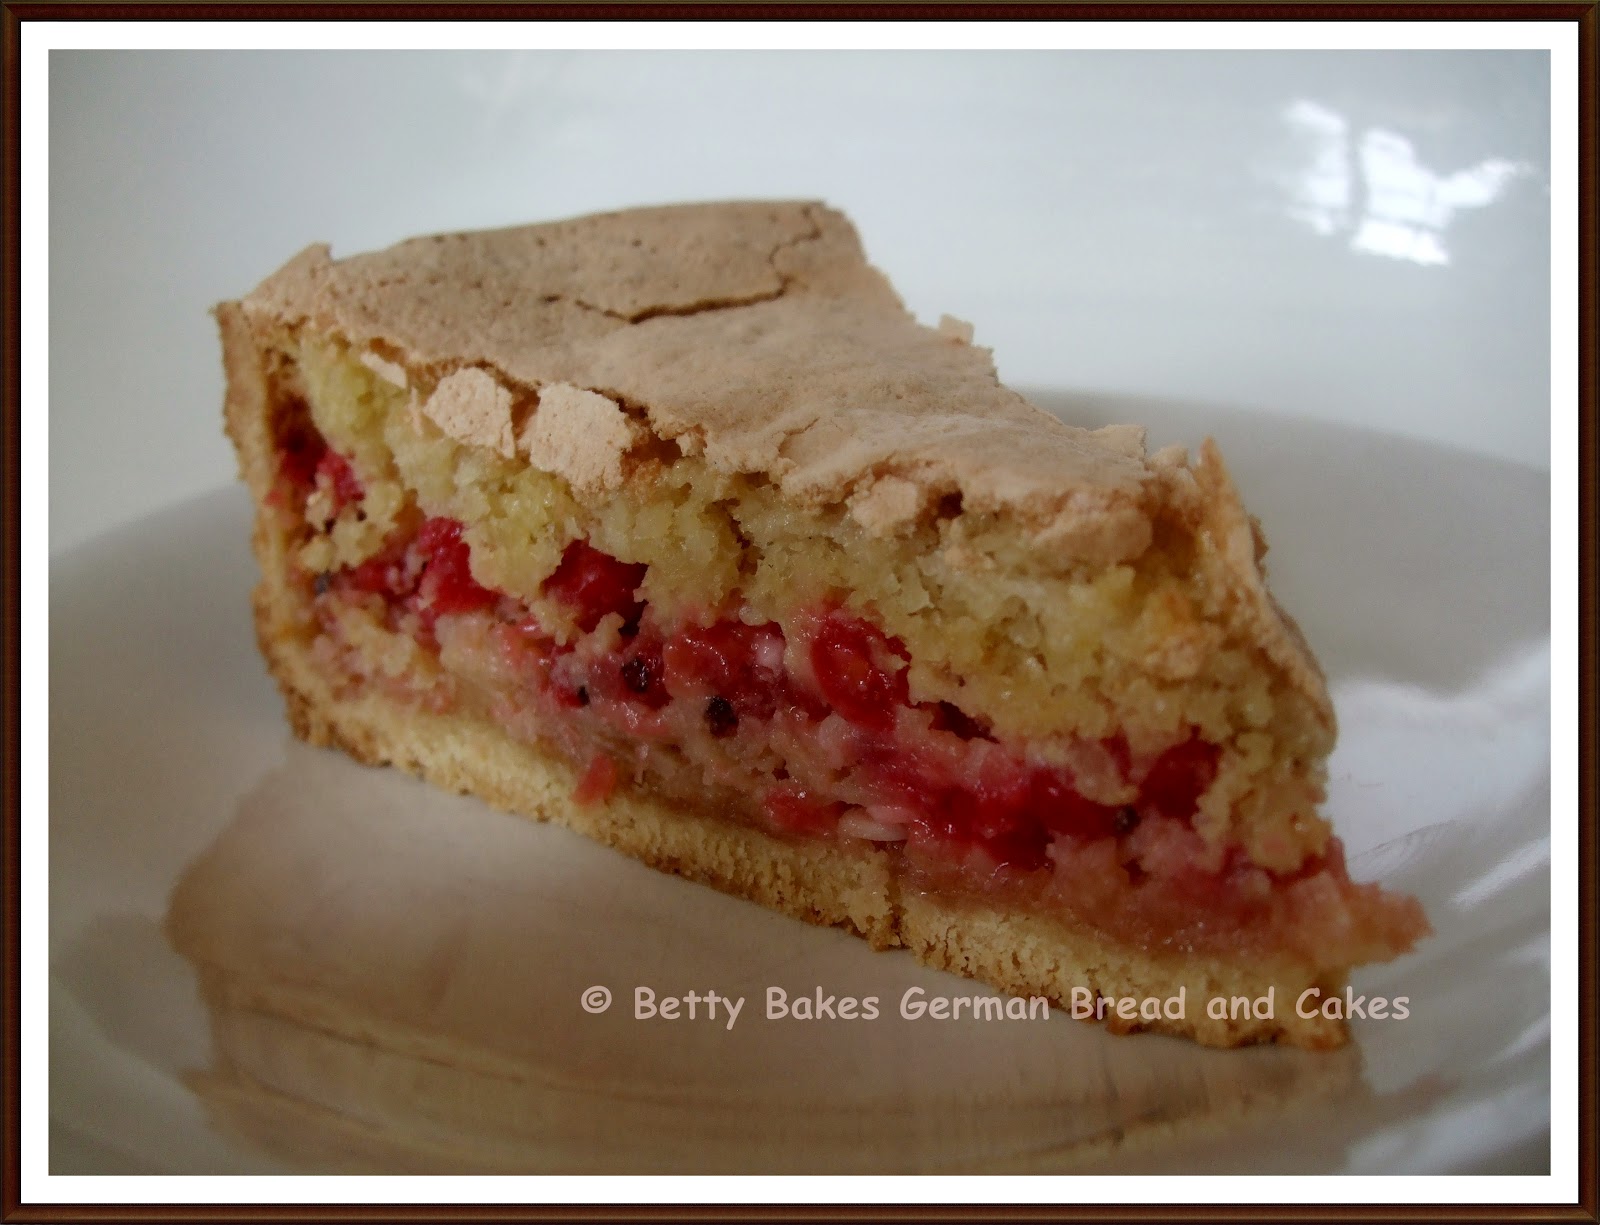 Betty Bakes German Bread and Cakes: Redcurrant cake - &amp;quot;Träubleskuchen&amp;quot;